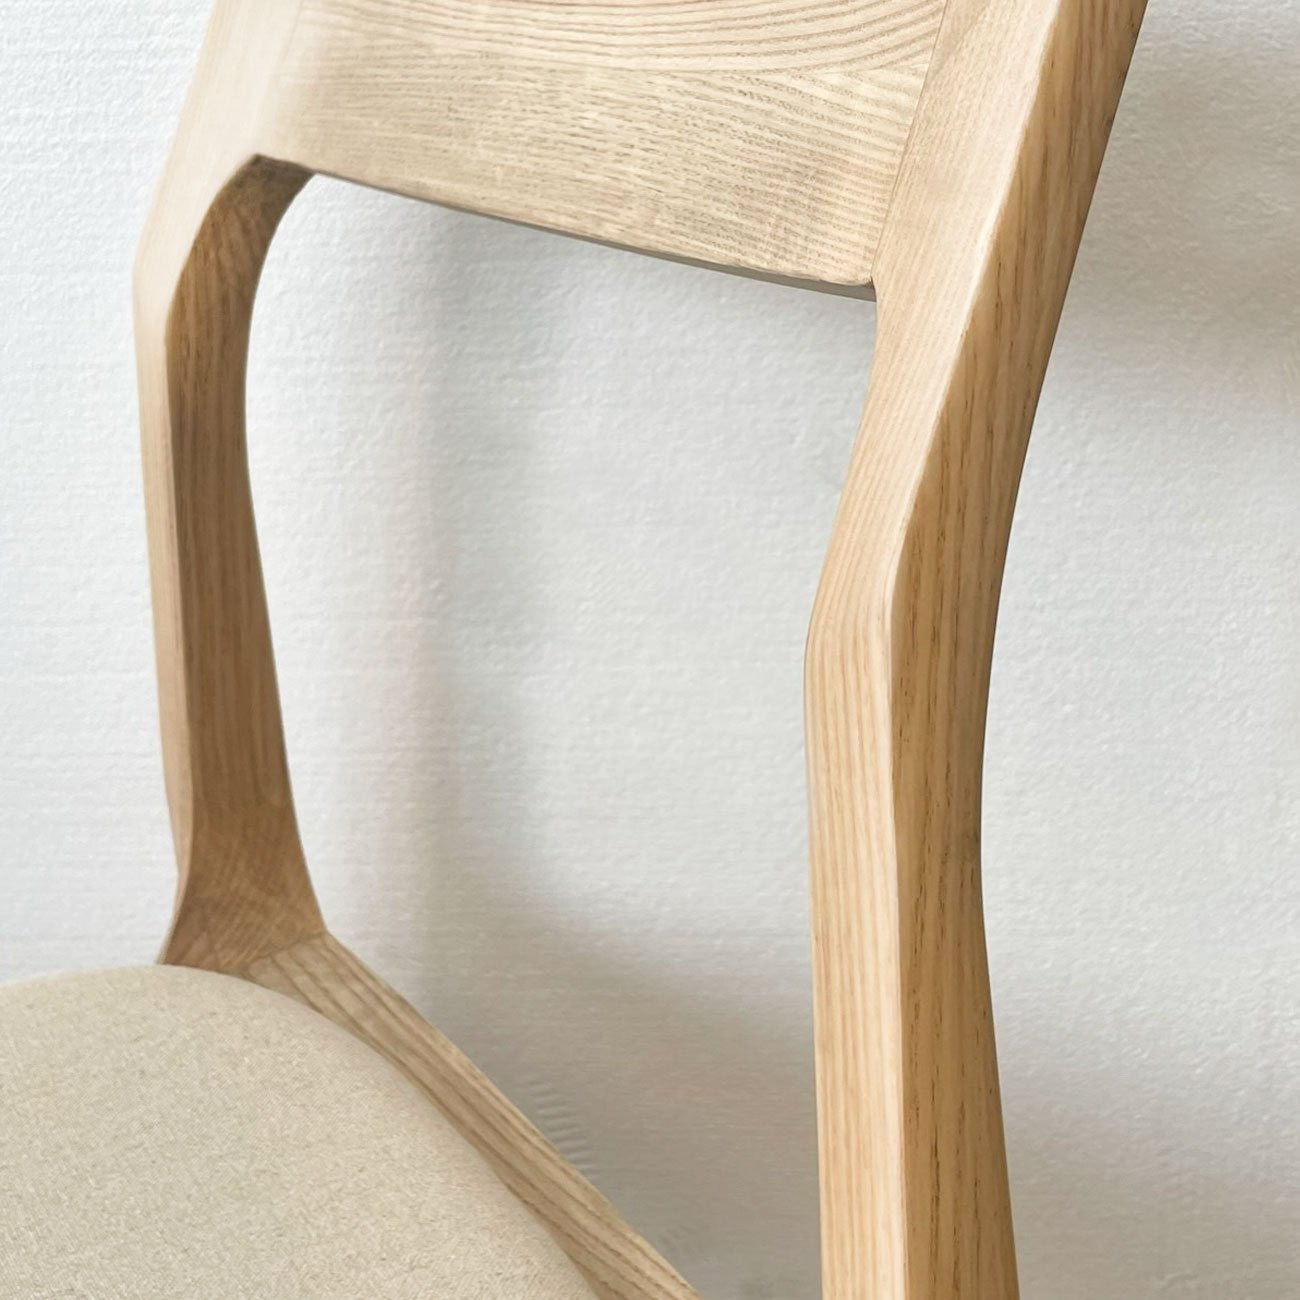 Carson Dining Chair - Natural + Linen